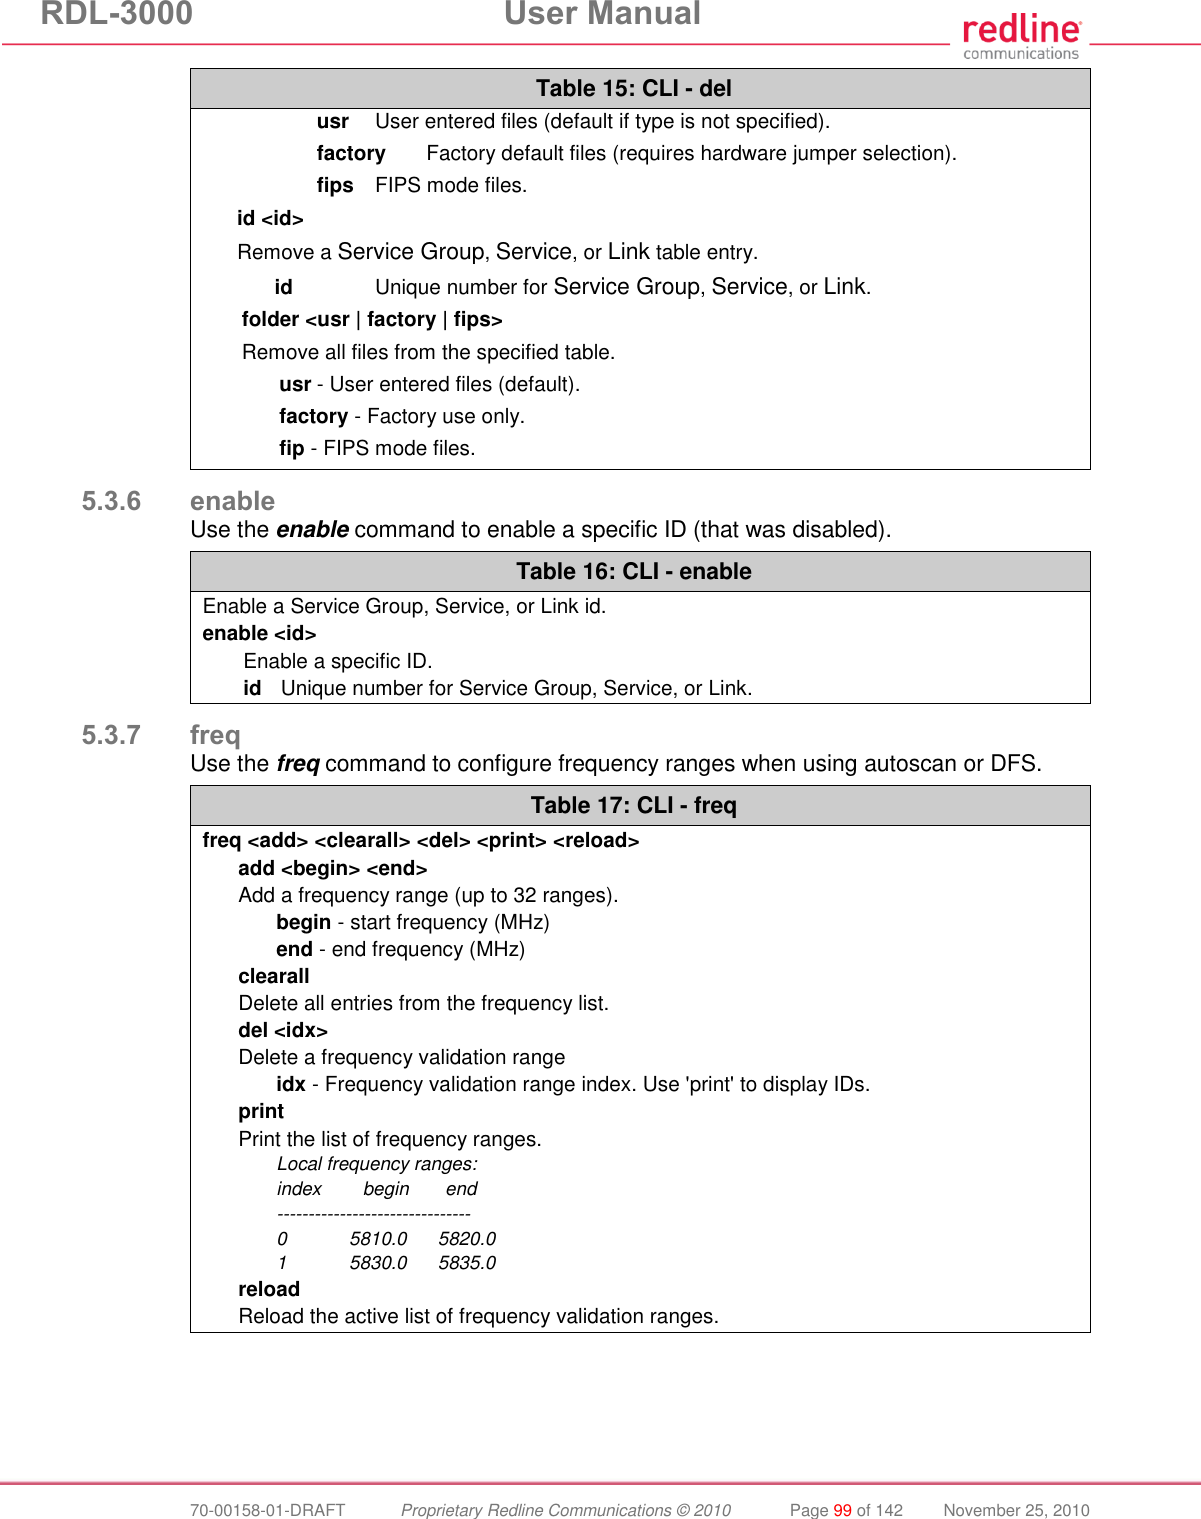 RDL-3000  User Manual  70-00158-01-DRAFT  Proprietary Redline Communications © 2010  Page 99 of 142  November 25, 2010 Table 15: CLI - del  usr  User entered files (default if type is not specified).  factory Factory default files (requires hardware jumper selection).  fips  FIPS mode files.  id &lt;id&gt; Remove a Service Group, Service, or Link table entry.  id  Unique number for Service Group, Service, or Link. folder &lt;usr | factory | fips&gt; Remove all files from the specified table. usr - User entered files (default). factory - Factory use only. fip - FIPS mode files.  5.3.6 enable Use the enable command to enable a specific ID (that was disabled). Table 16: CLI - enable Enable a Service Group, Service, or Link id. enable &lt;id&gt; Enable a specific ID. id  Unique number for Service Group, Service, or Link.  5.3.7 freq Use the freq command to configure frequency ranges when using autoscan or DFS. Table 17: CLI - freq freq &lt;add&gt; &lt;clearall&gt; &lt;del&gt; &lt;print&gt; &lt;reload&gt; add &lt;begin&gt; &lt;end&gt; Add a frequency range (up to 32 ranges).  begin - start frequency (MHz)  end - end frequency (MHz) clearall Delete all entries from the frequency list. del &lt;idx&gt; Delete a frequency validation range  idx - Frequency validation range index. Use &apos;print&apos; to display IDs. print Print the list of frequency ranges.   Local frequency ranges:   index        begin       end  -------------------------------   0            5810.0      5820.0   1            5830.0      5835.0 reload Reload the active list of frequency validation ranges.    